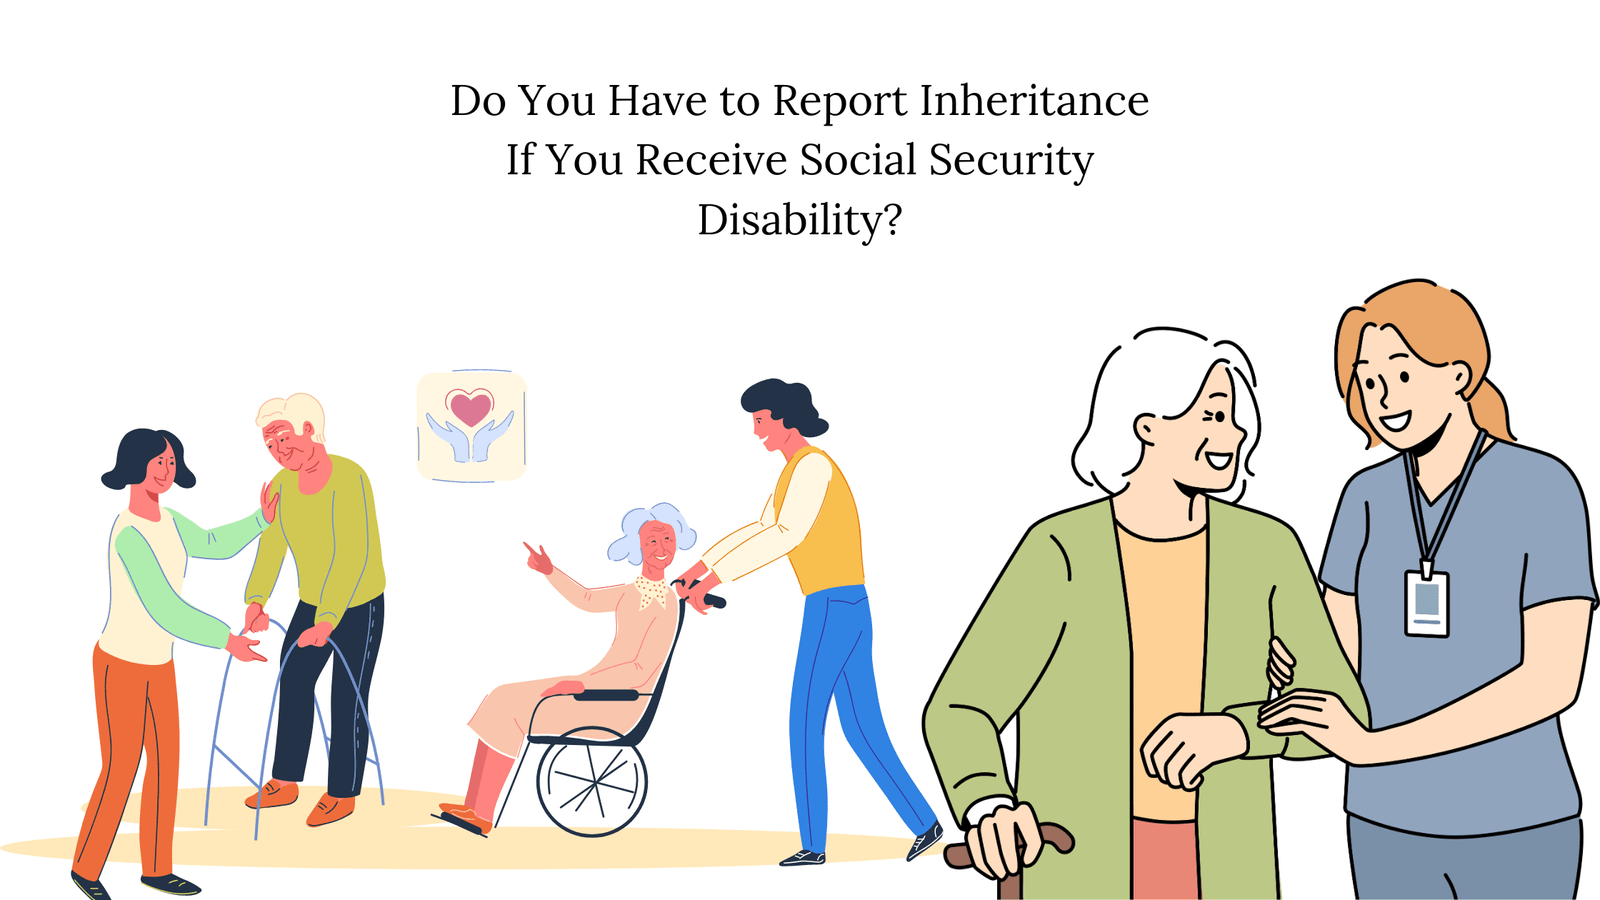 Do You Have to Report Inheritance If You Receive Social Security Disability?